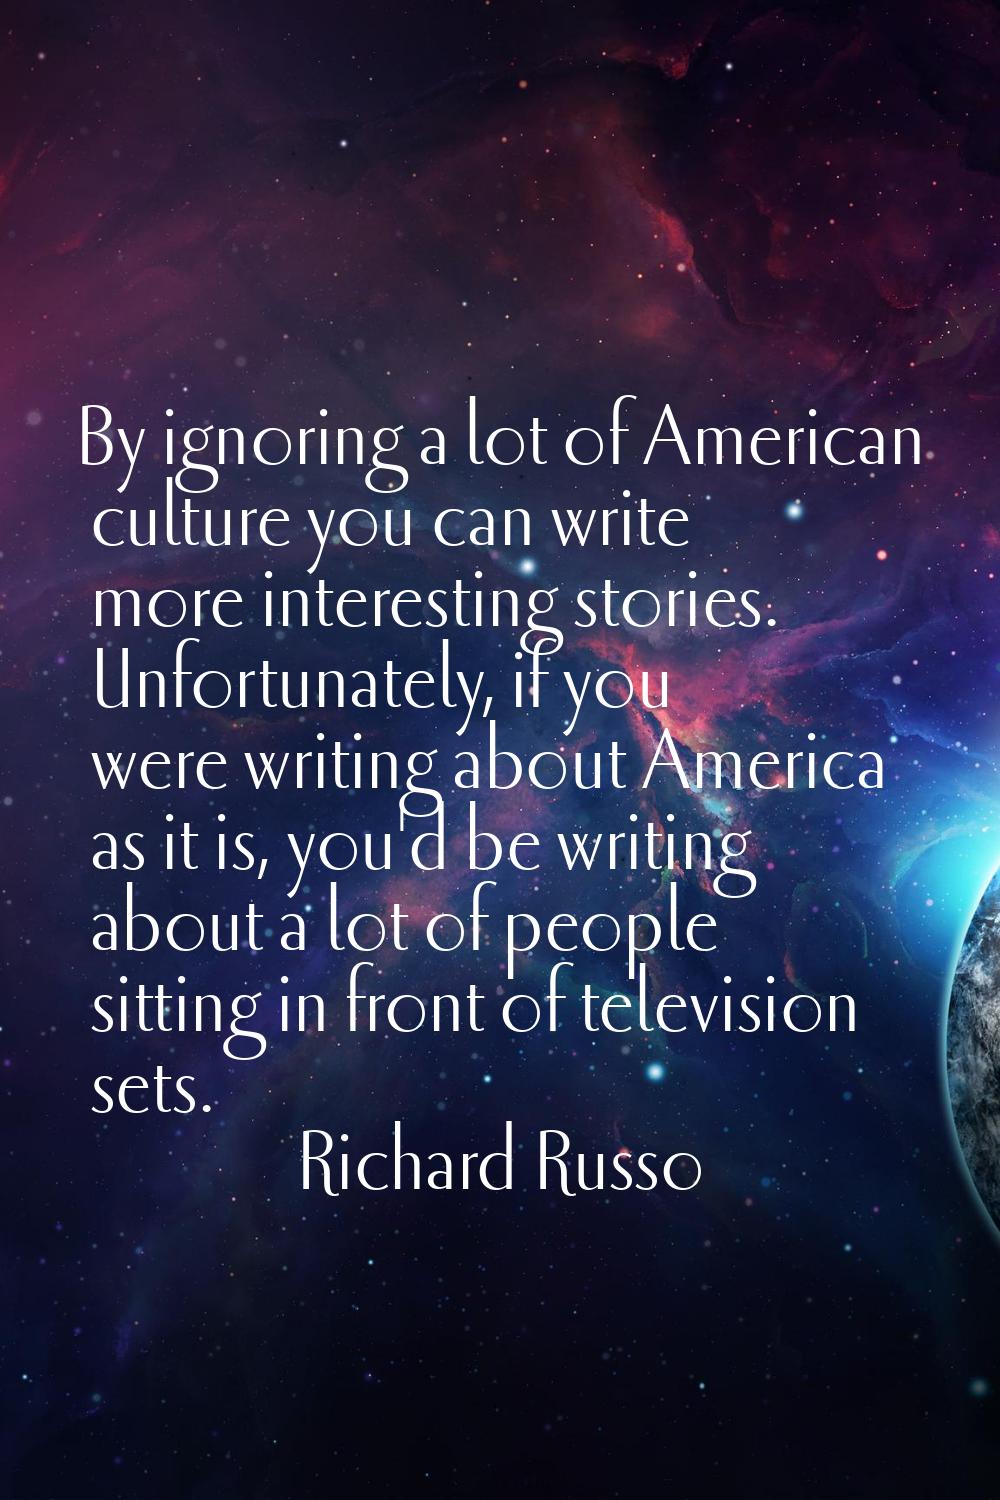 By ignoring a lot of American culture you can write more interesting stories. Unfortunately, if you